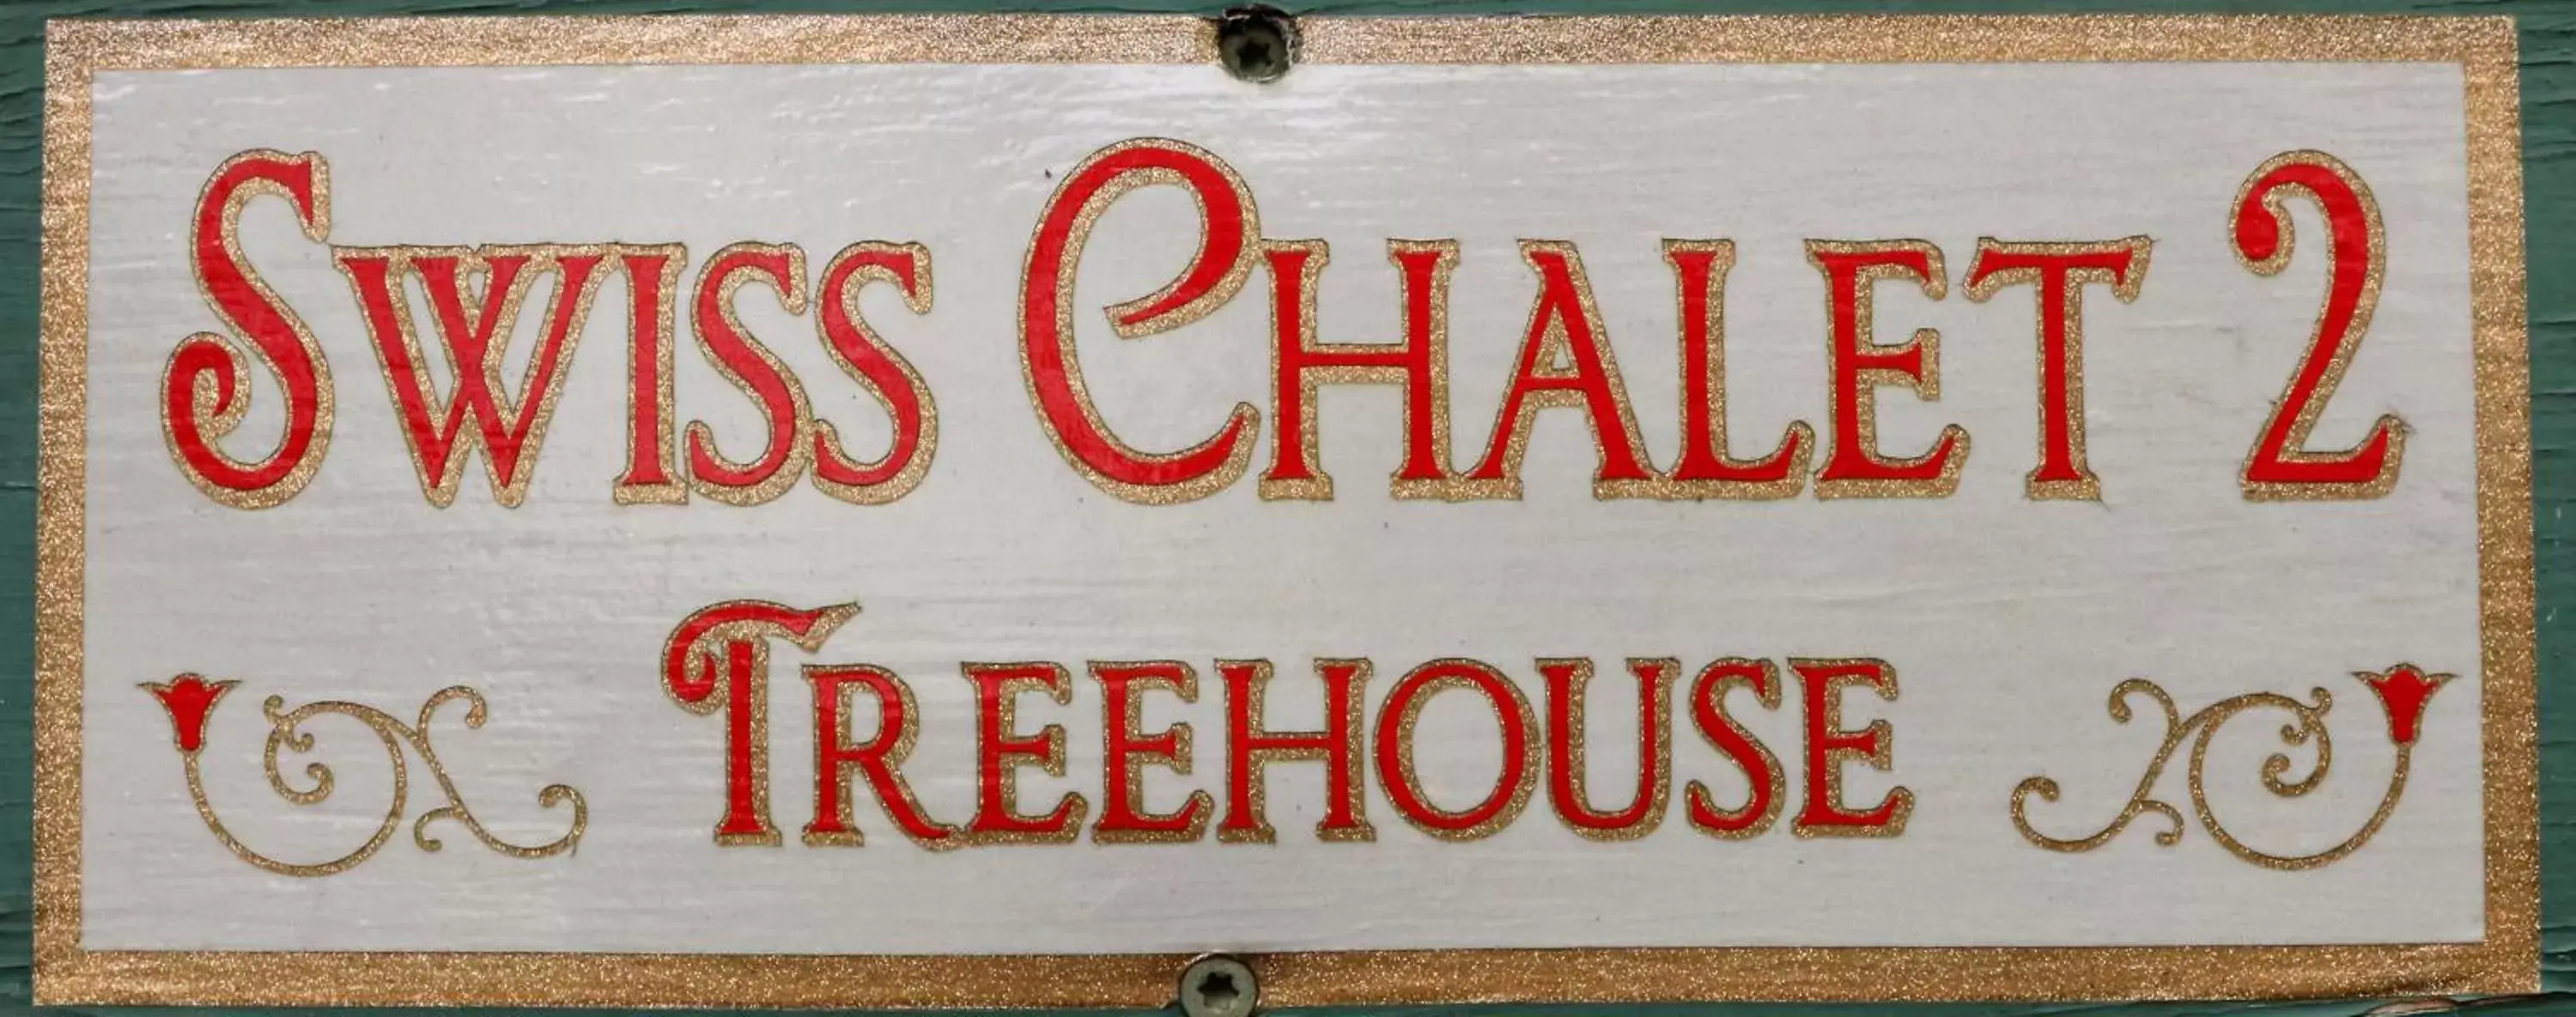 Property logo or sign in The Grand Treehouse Resort